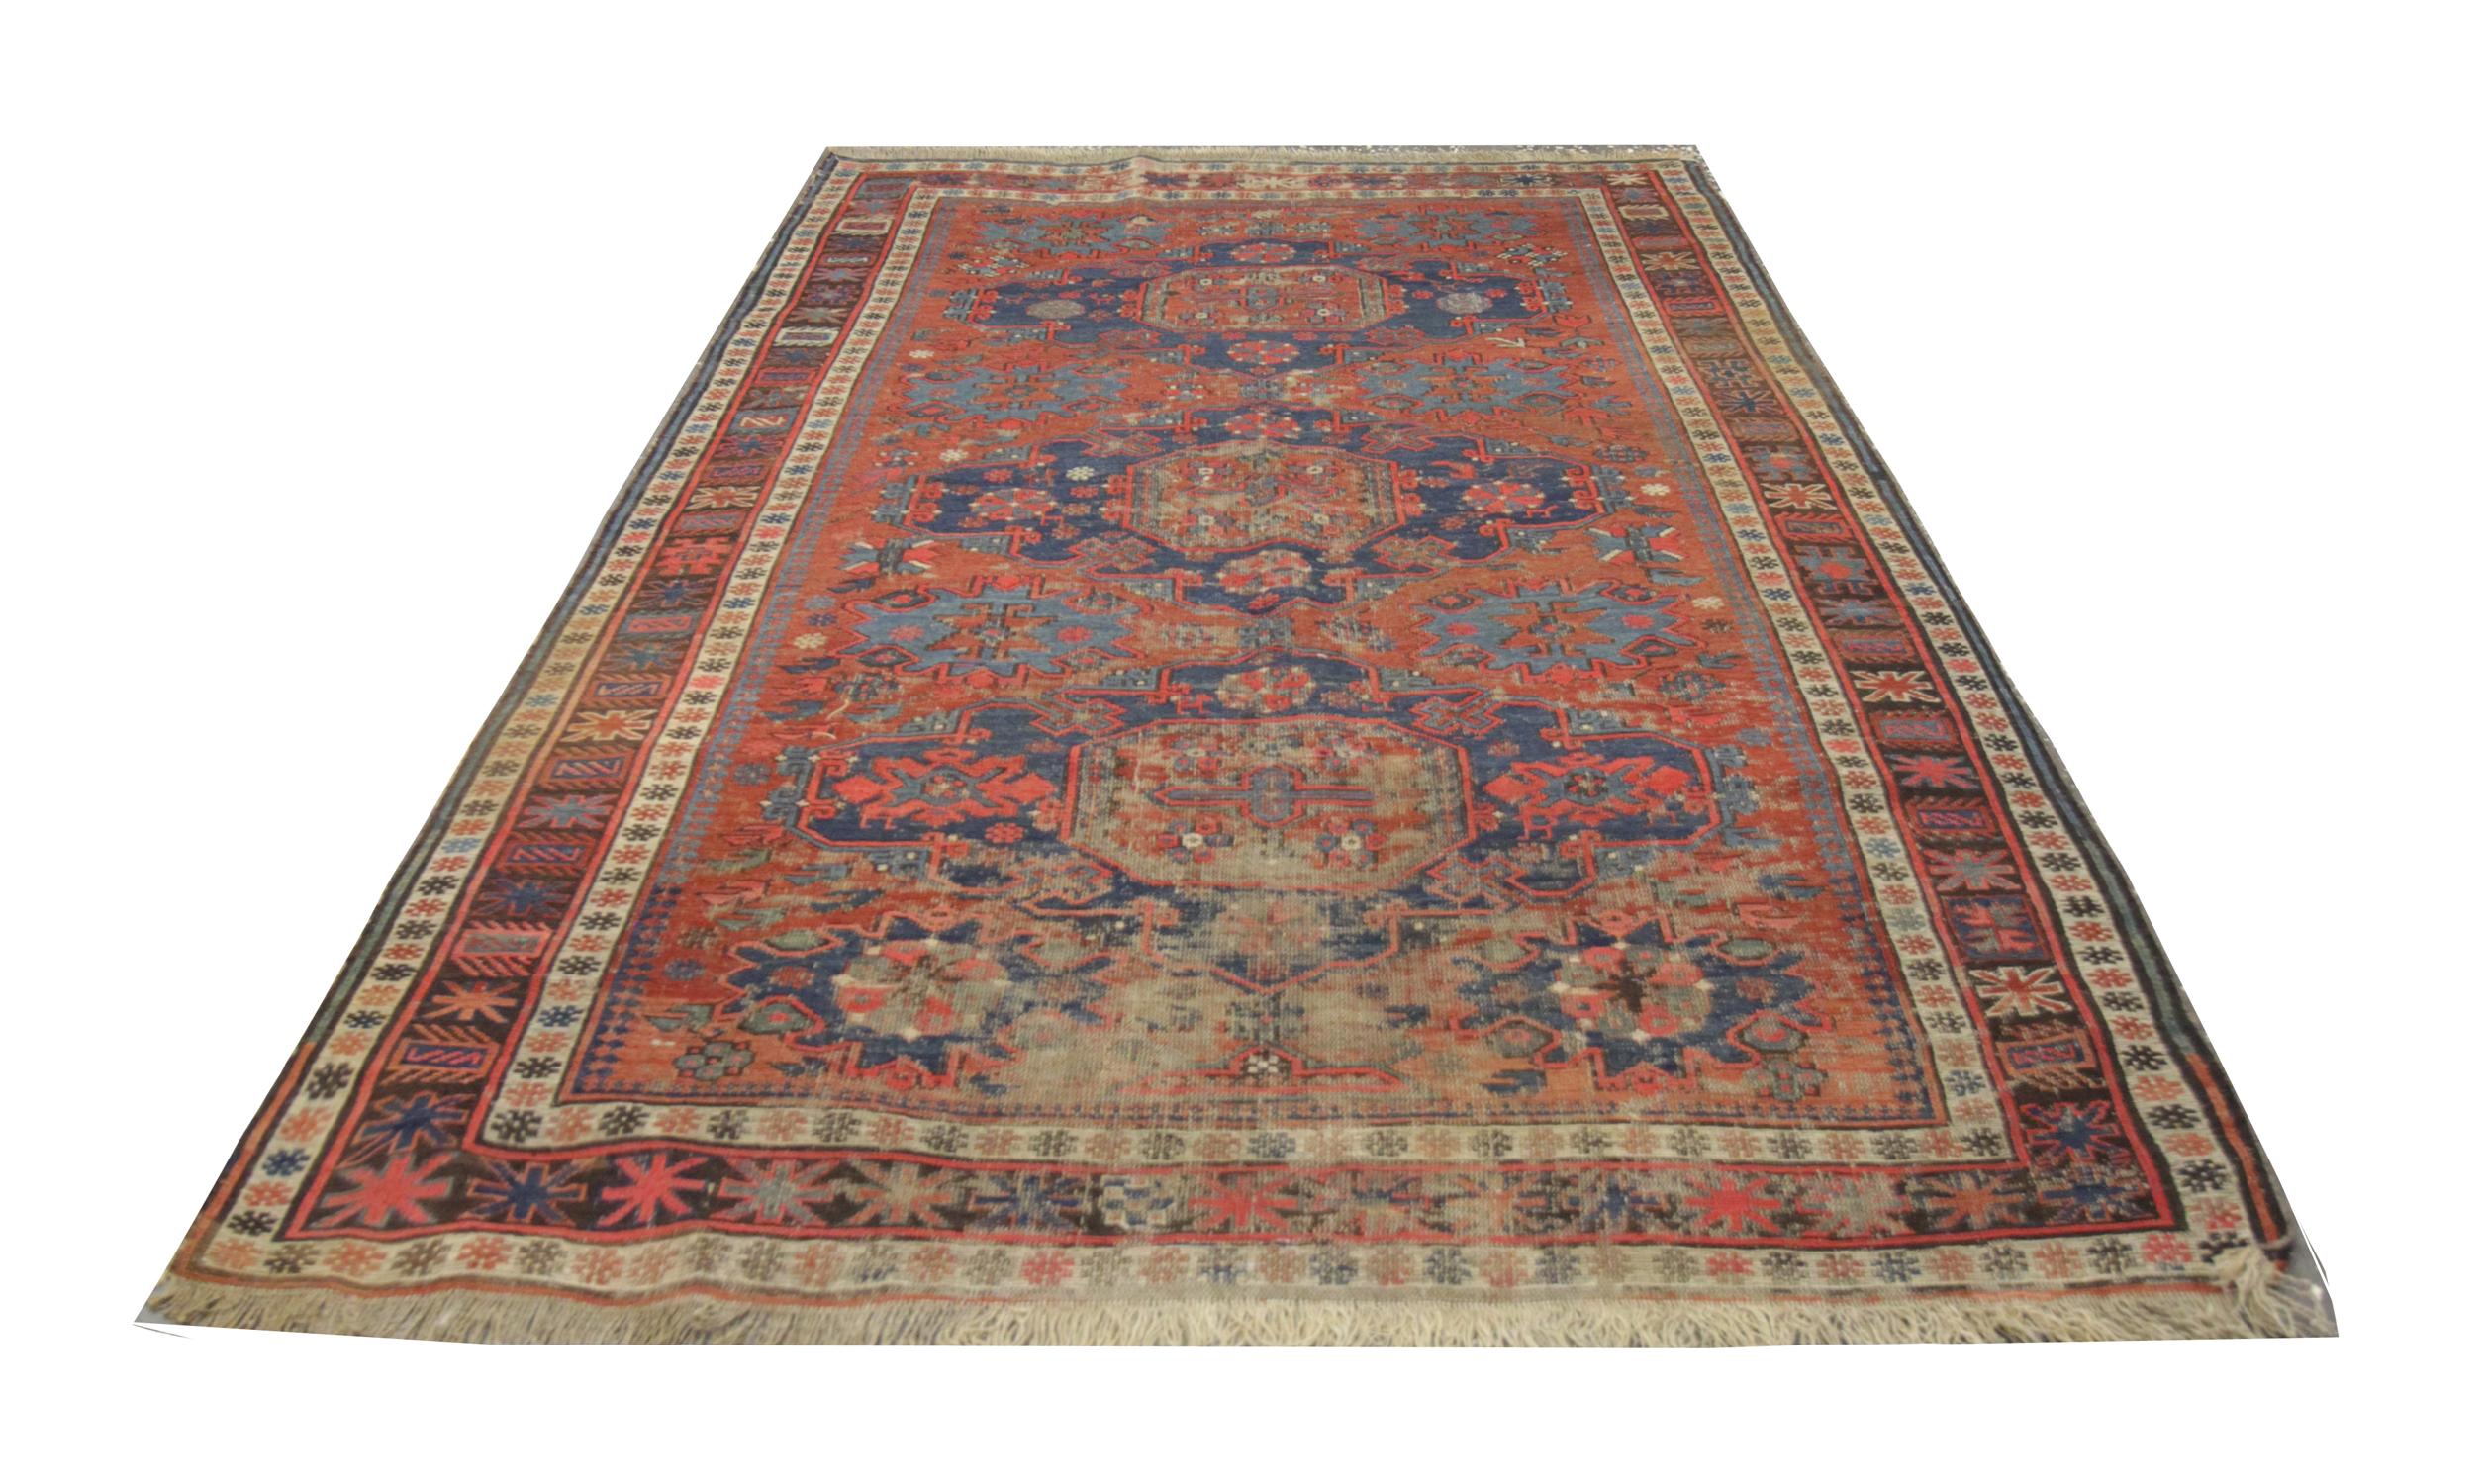 Featuring red and blue colorways in a geometric repeat central design which is enclosed by a triple layer highly detailed border. This high-quality area rug was hand knotted in the 1880s with hand-spun, vegetable-dyed wool and cotton, by some of the